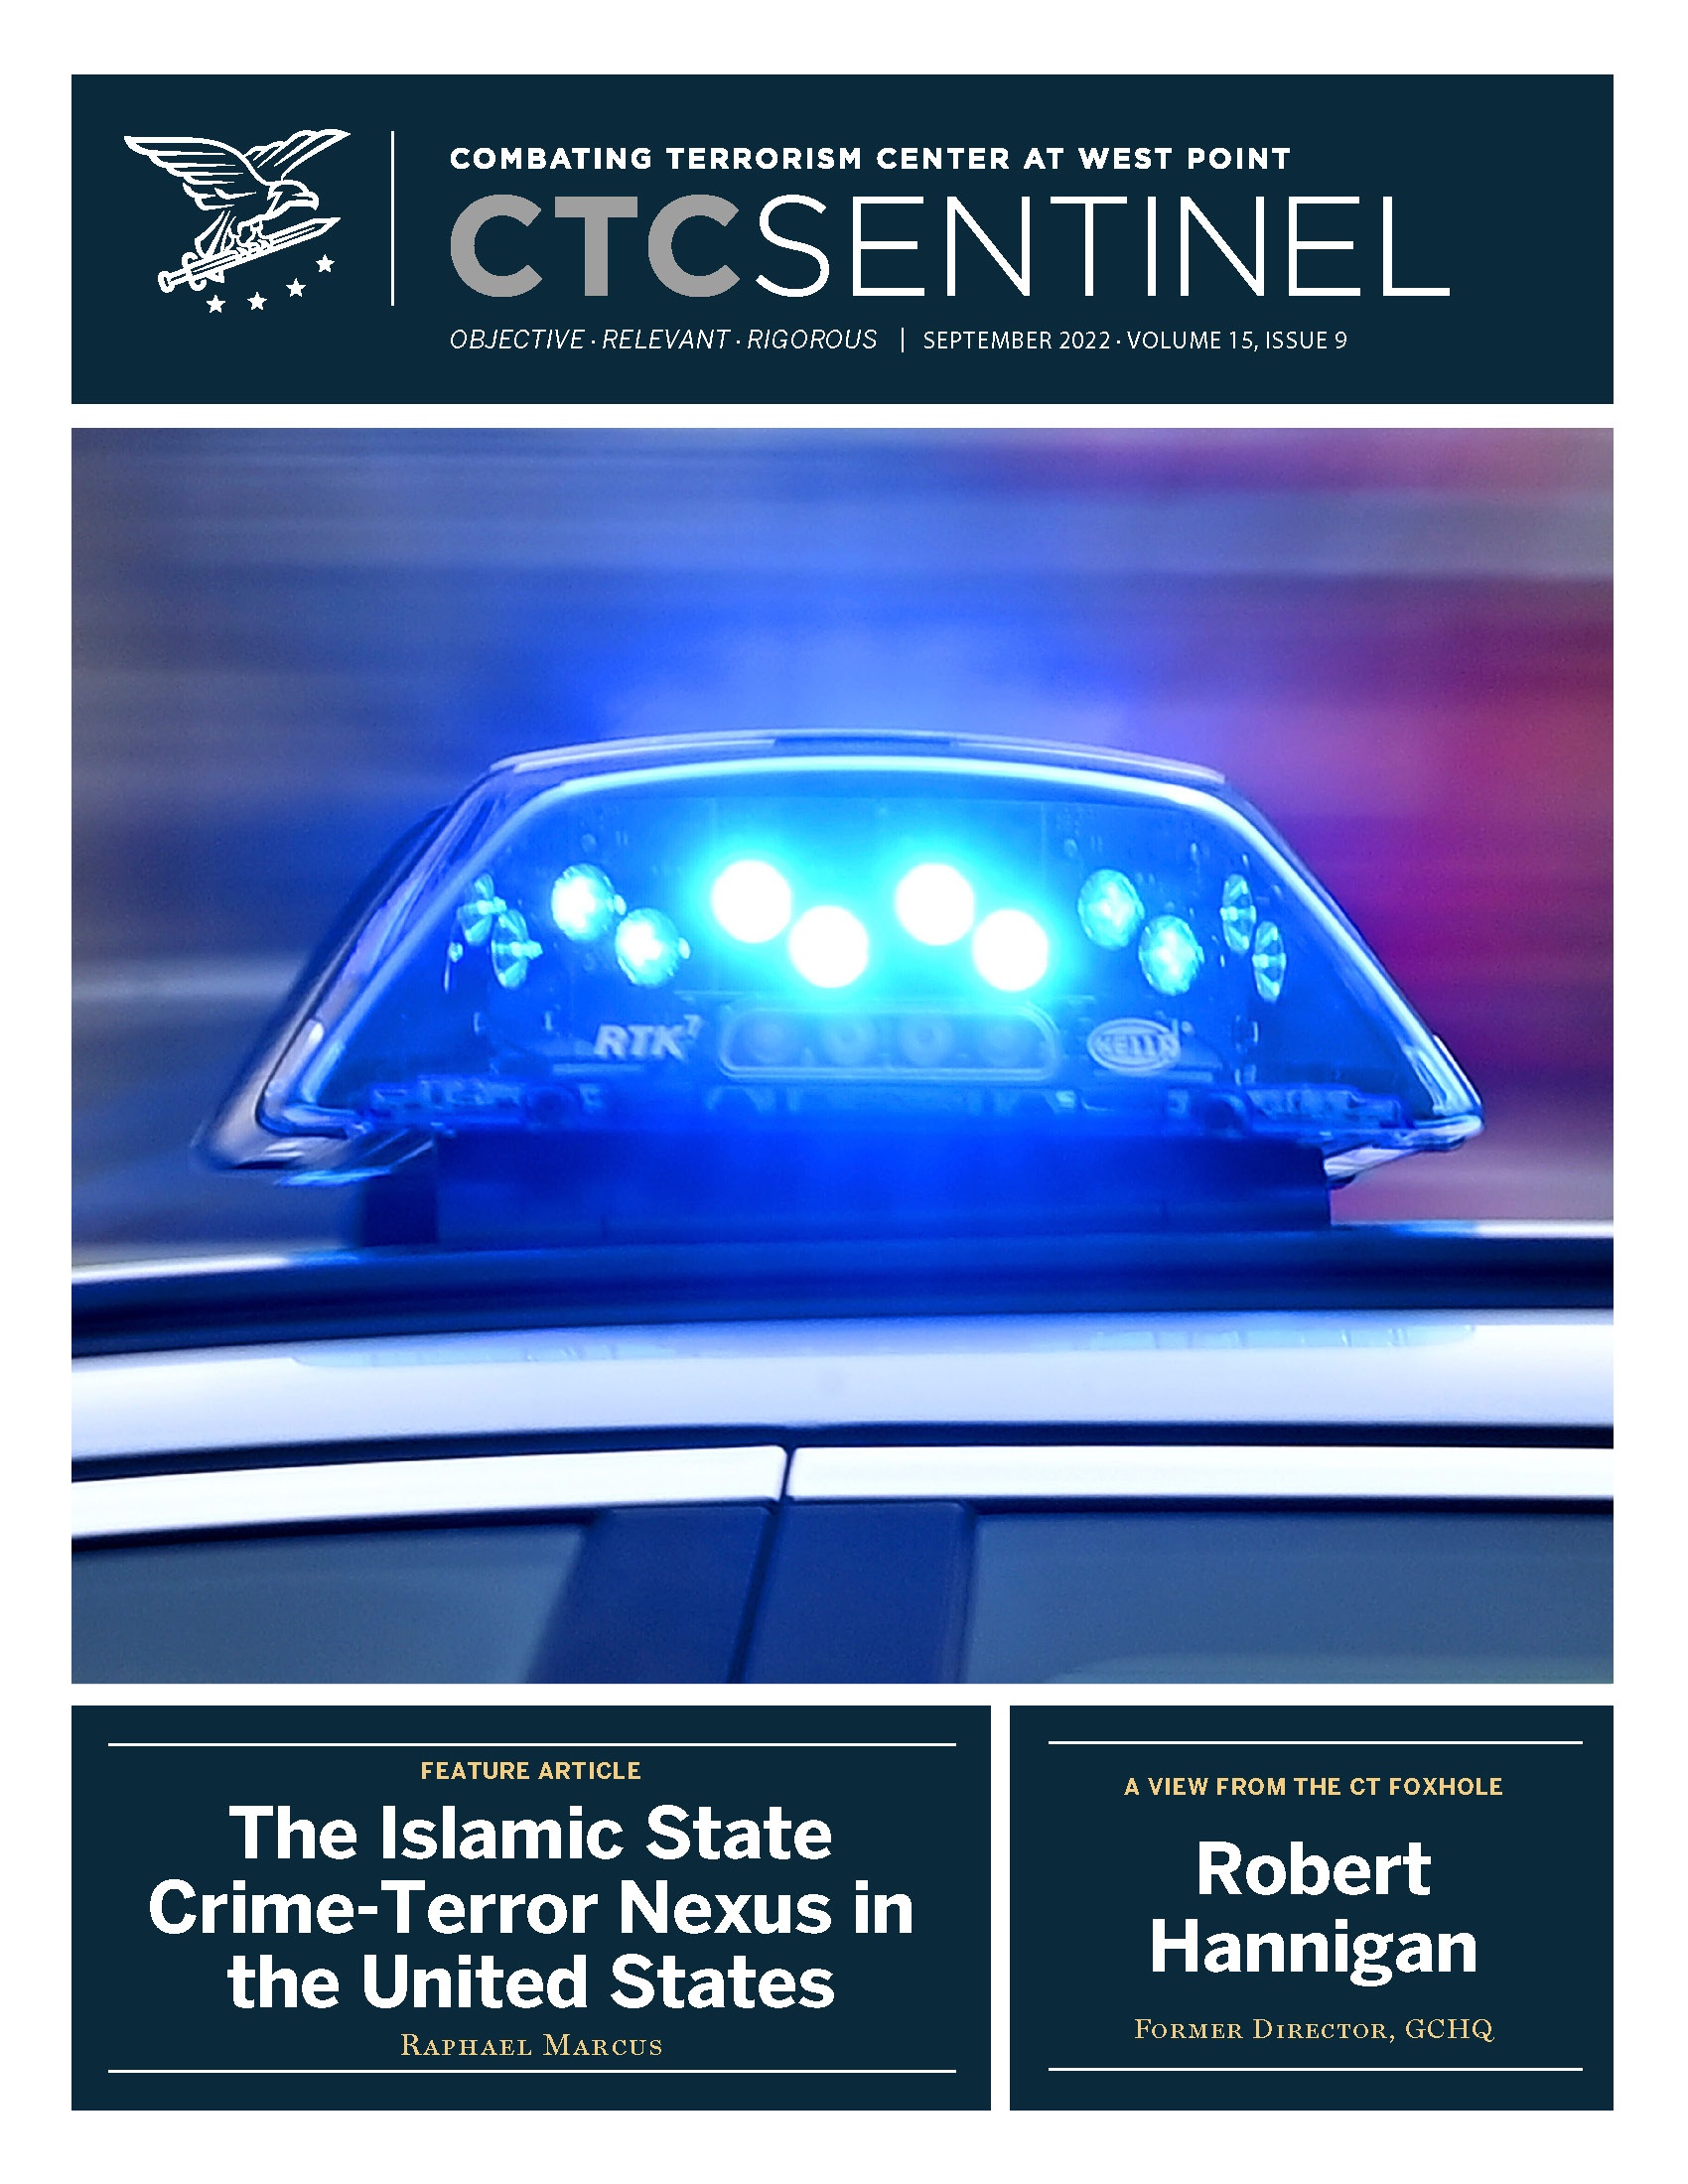 The Islamic State Crime-Terror Nexus in the United States 